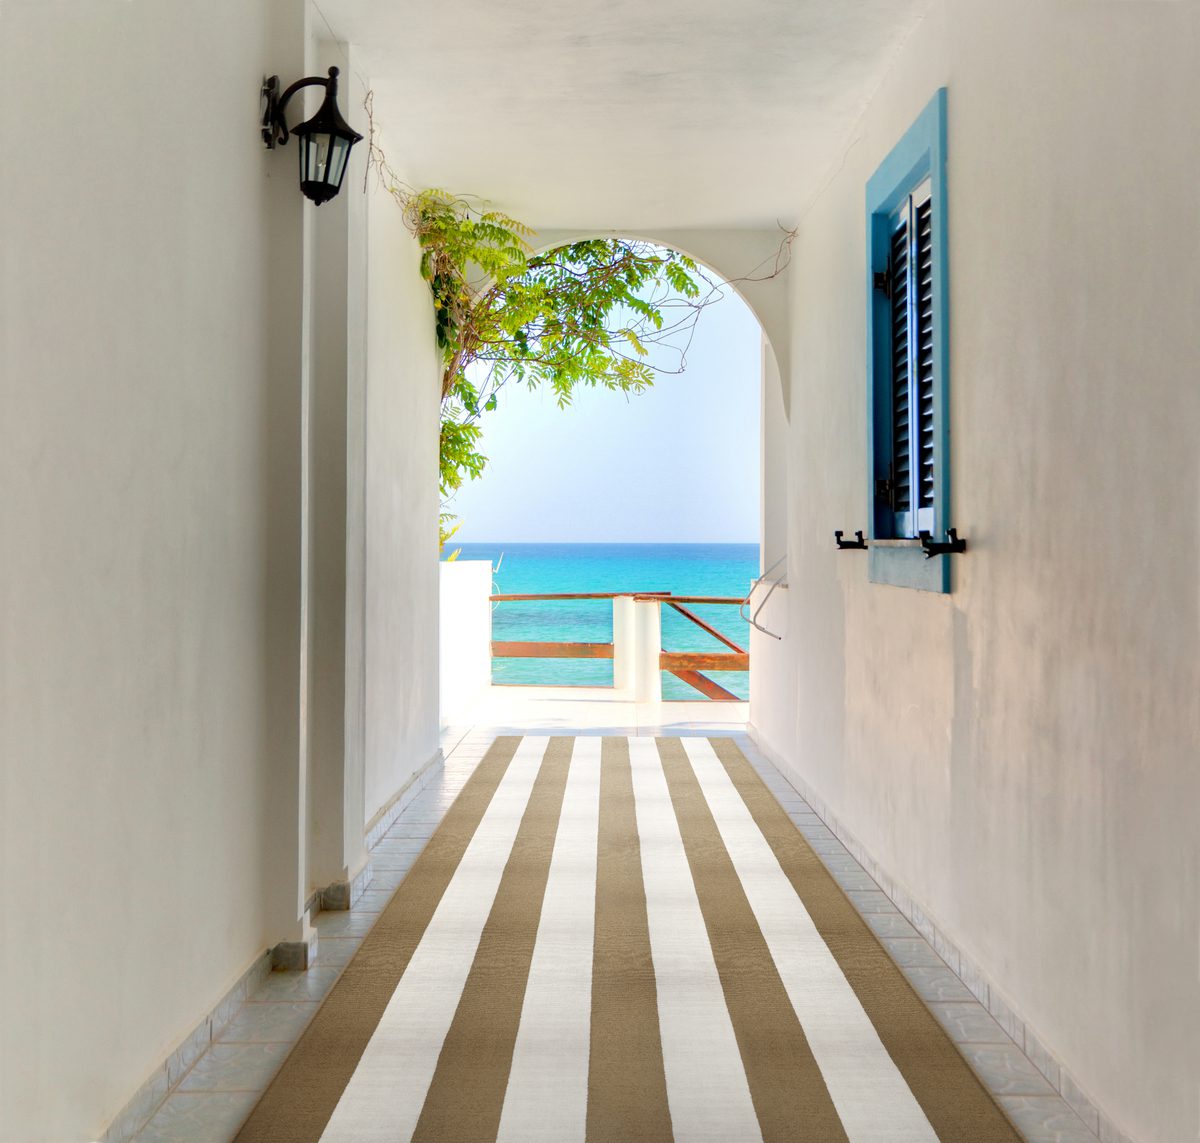 Walkthrough between the houses to the beach in a Greek town on t